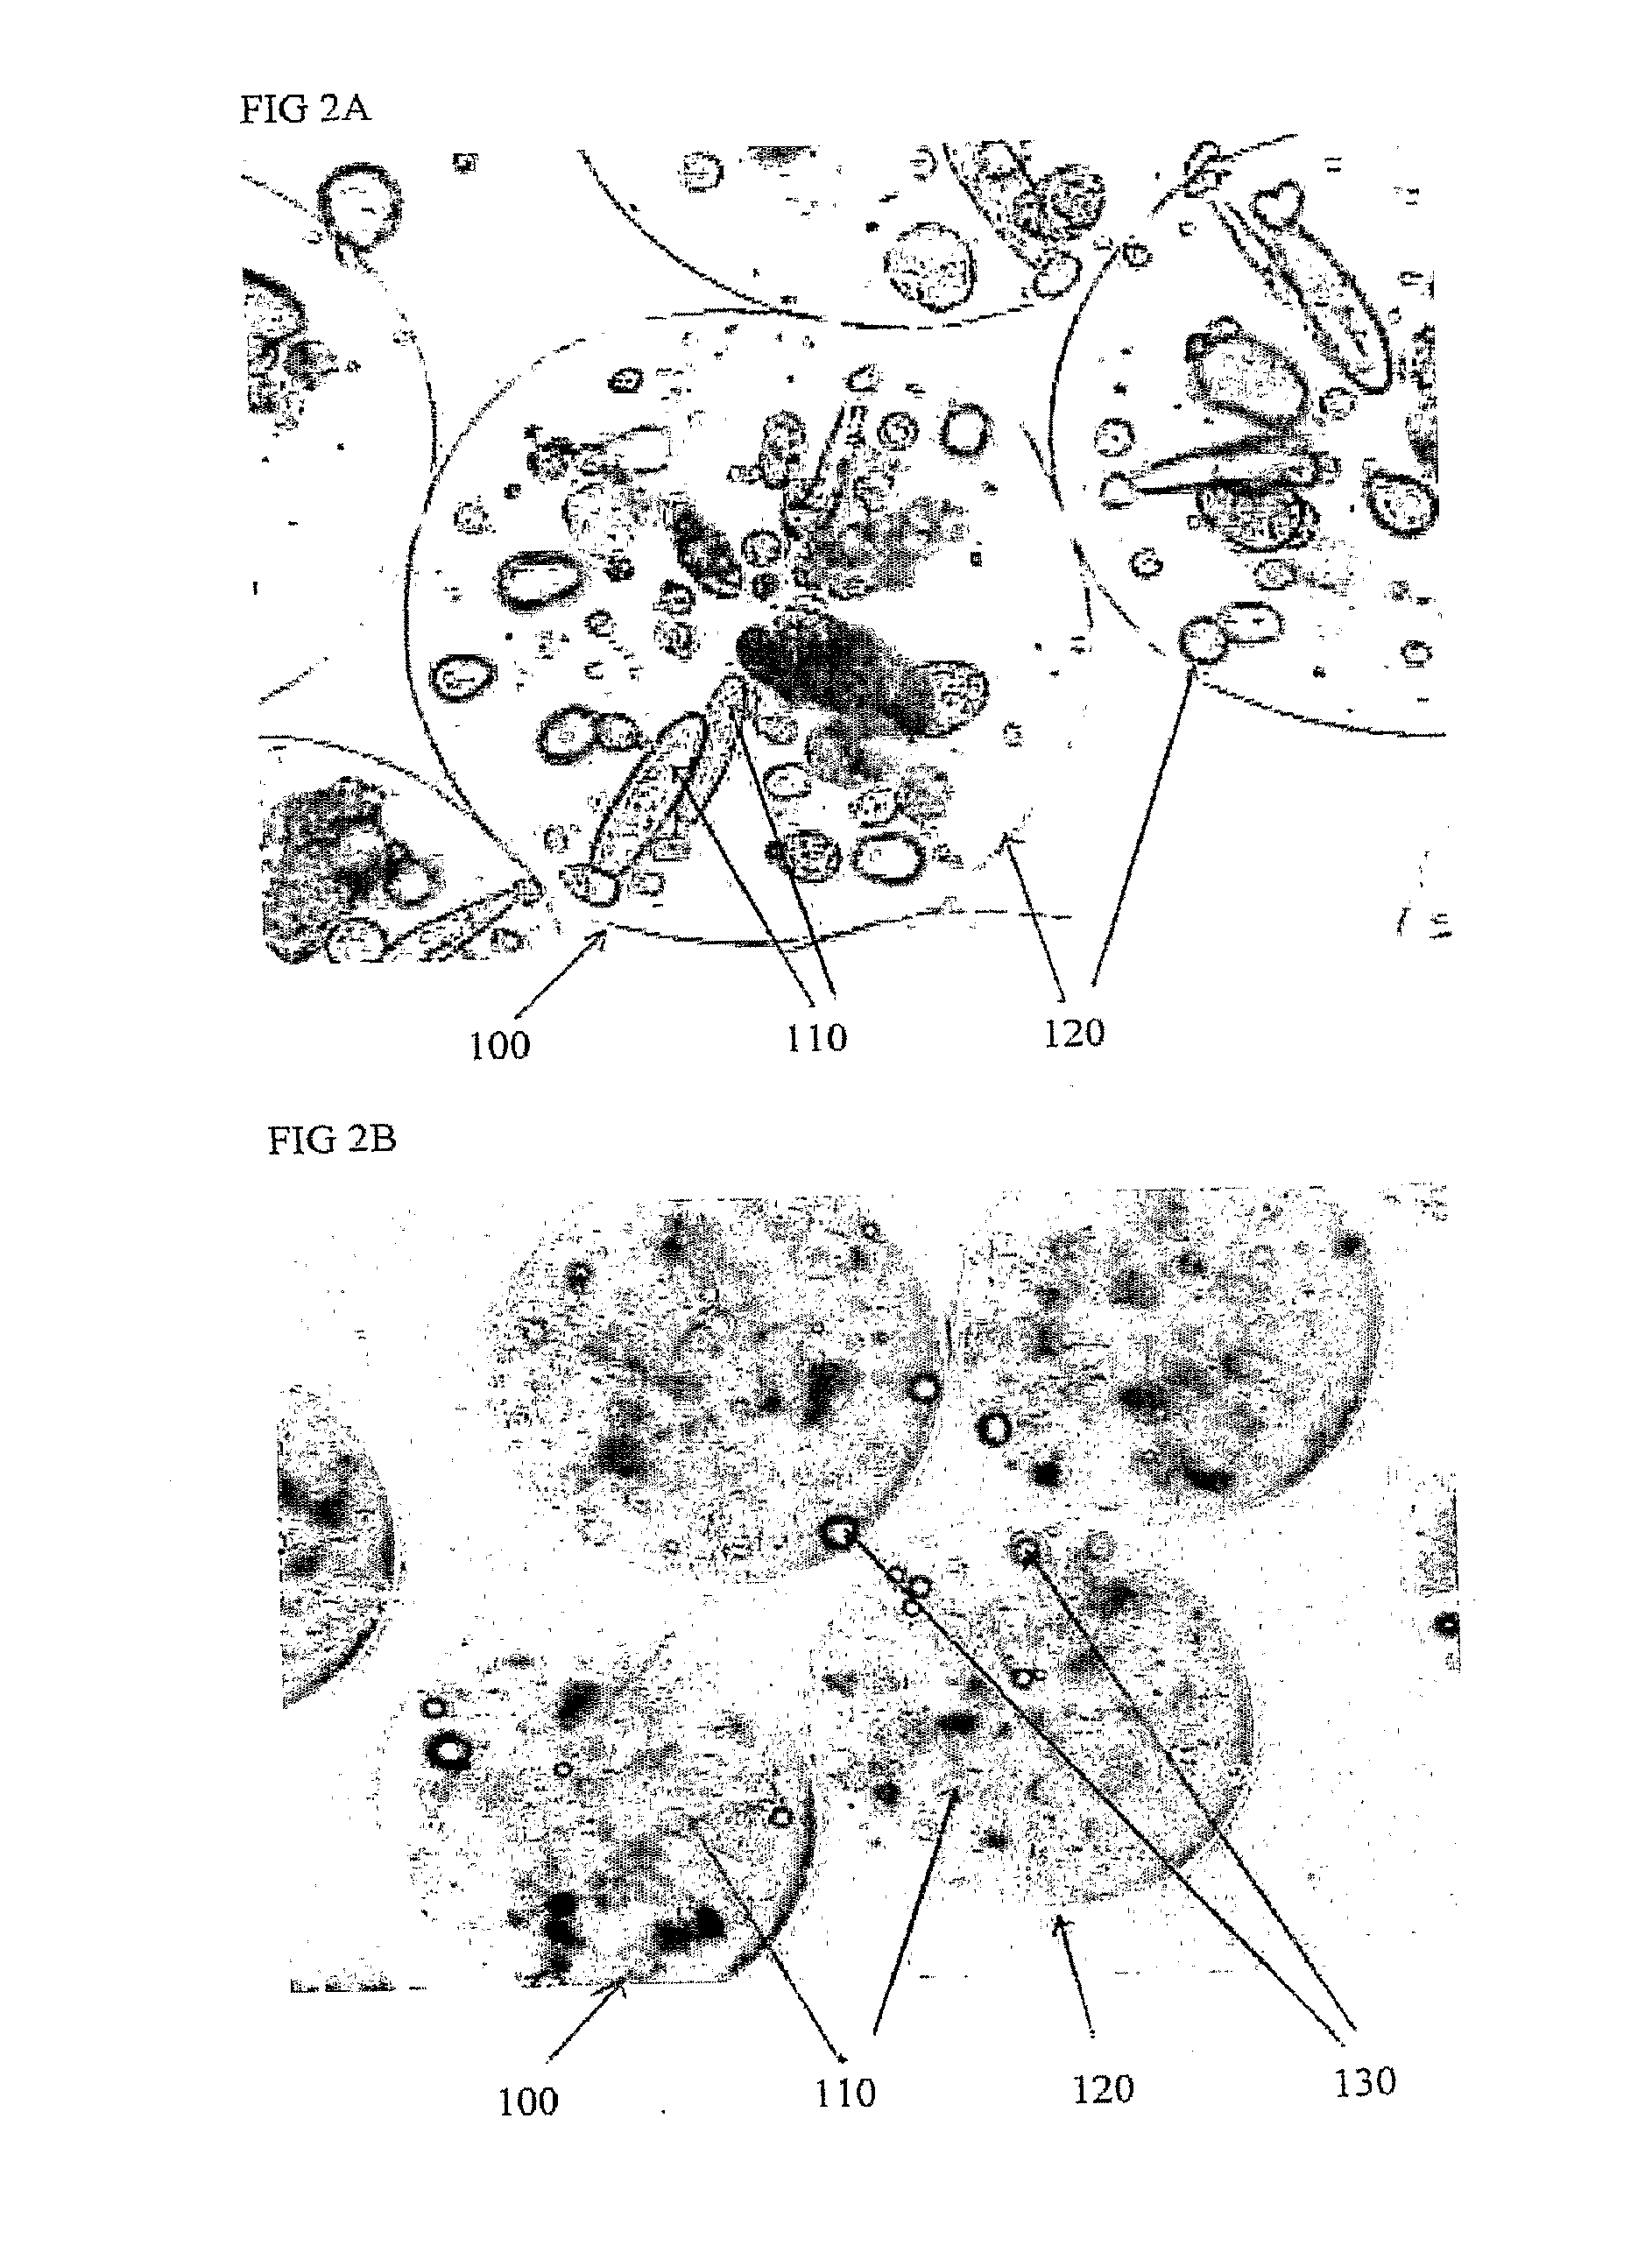 Multi-functional chamber housing a biological component